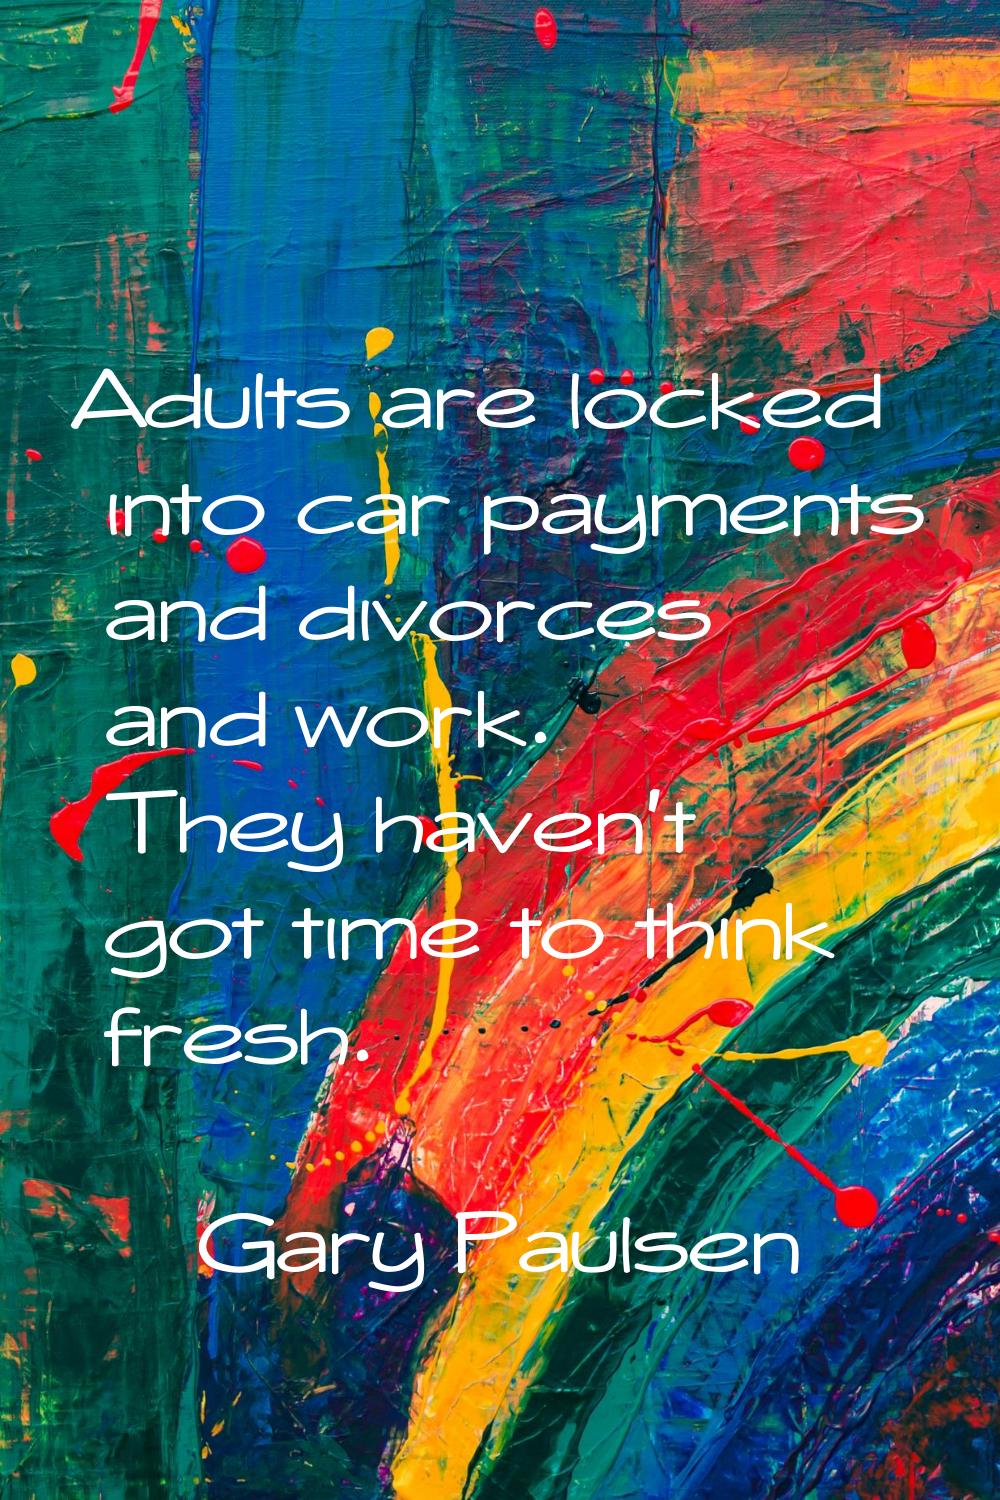 Adults are locked into car payments and divorces and work. They haven't got time to think fresh.